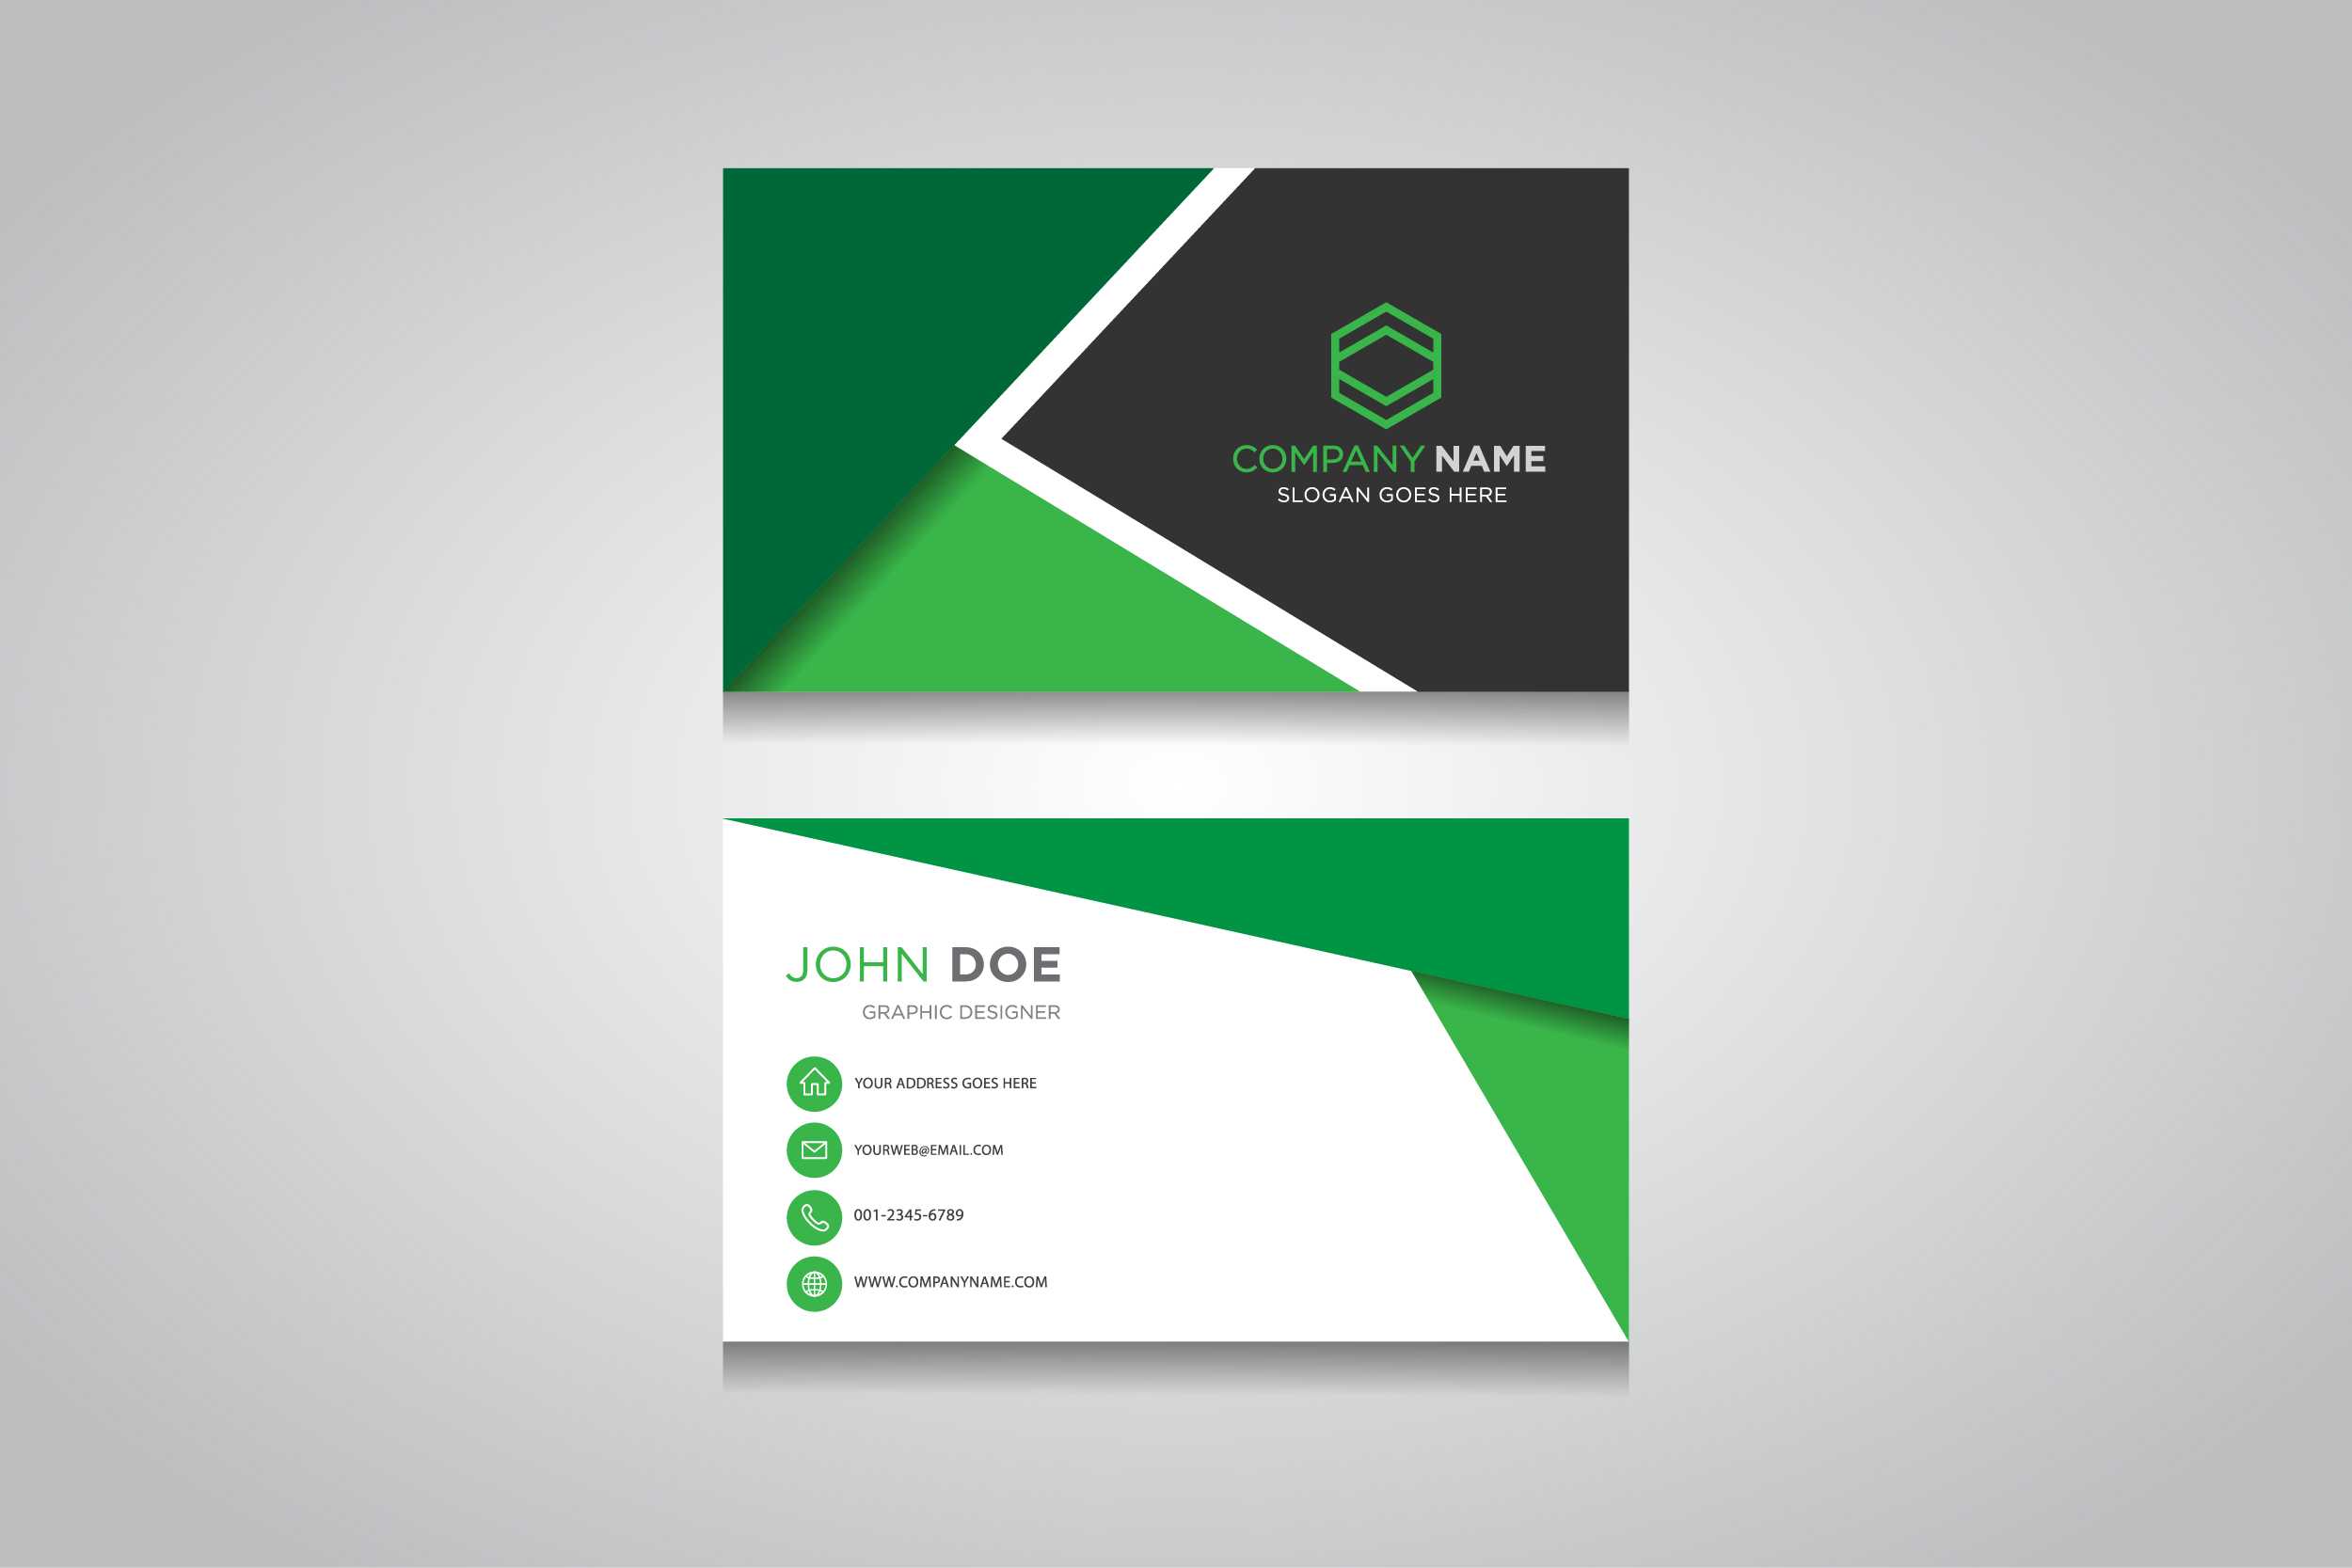 Business Card Template. Creative Business Card With Buisness Card Template